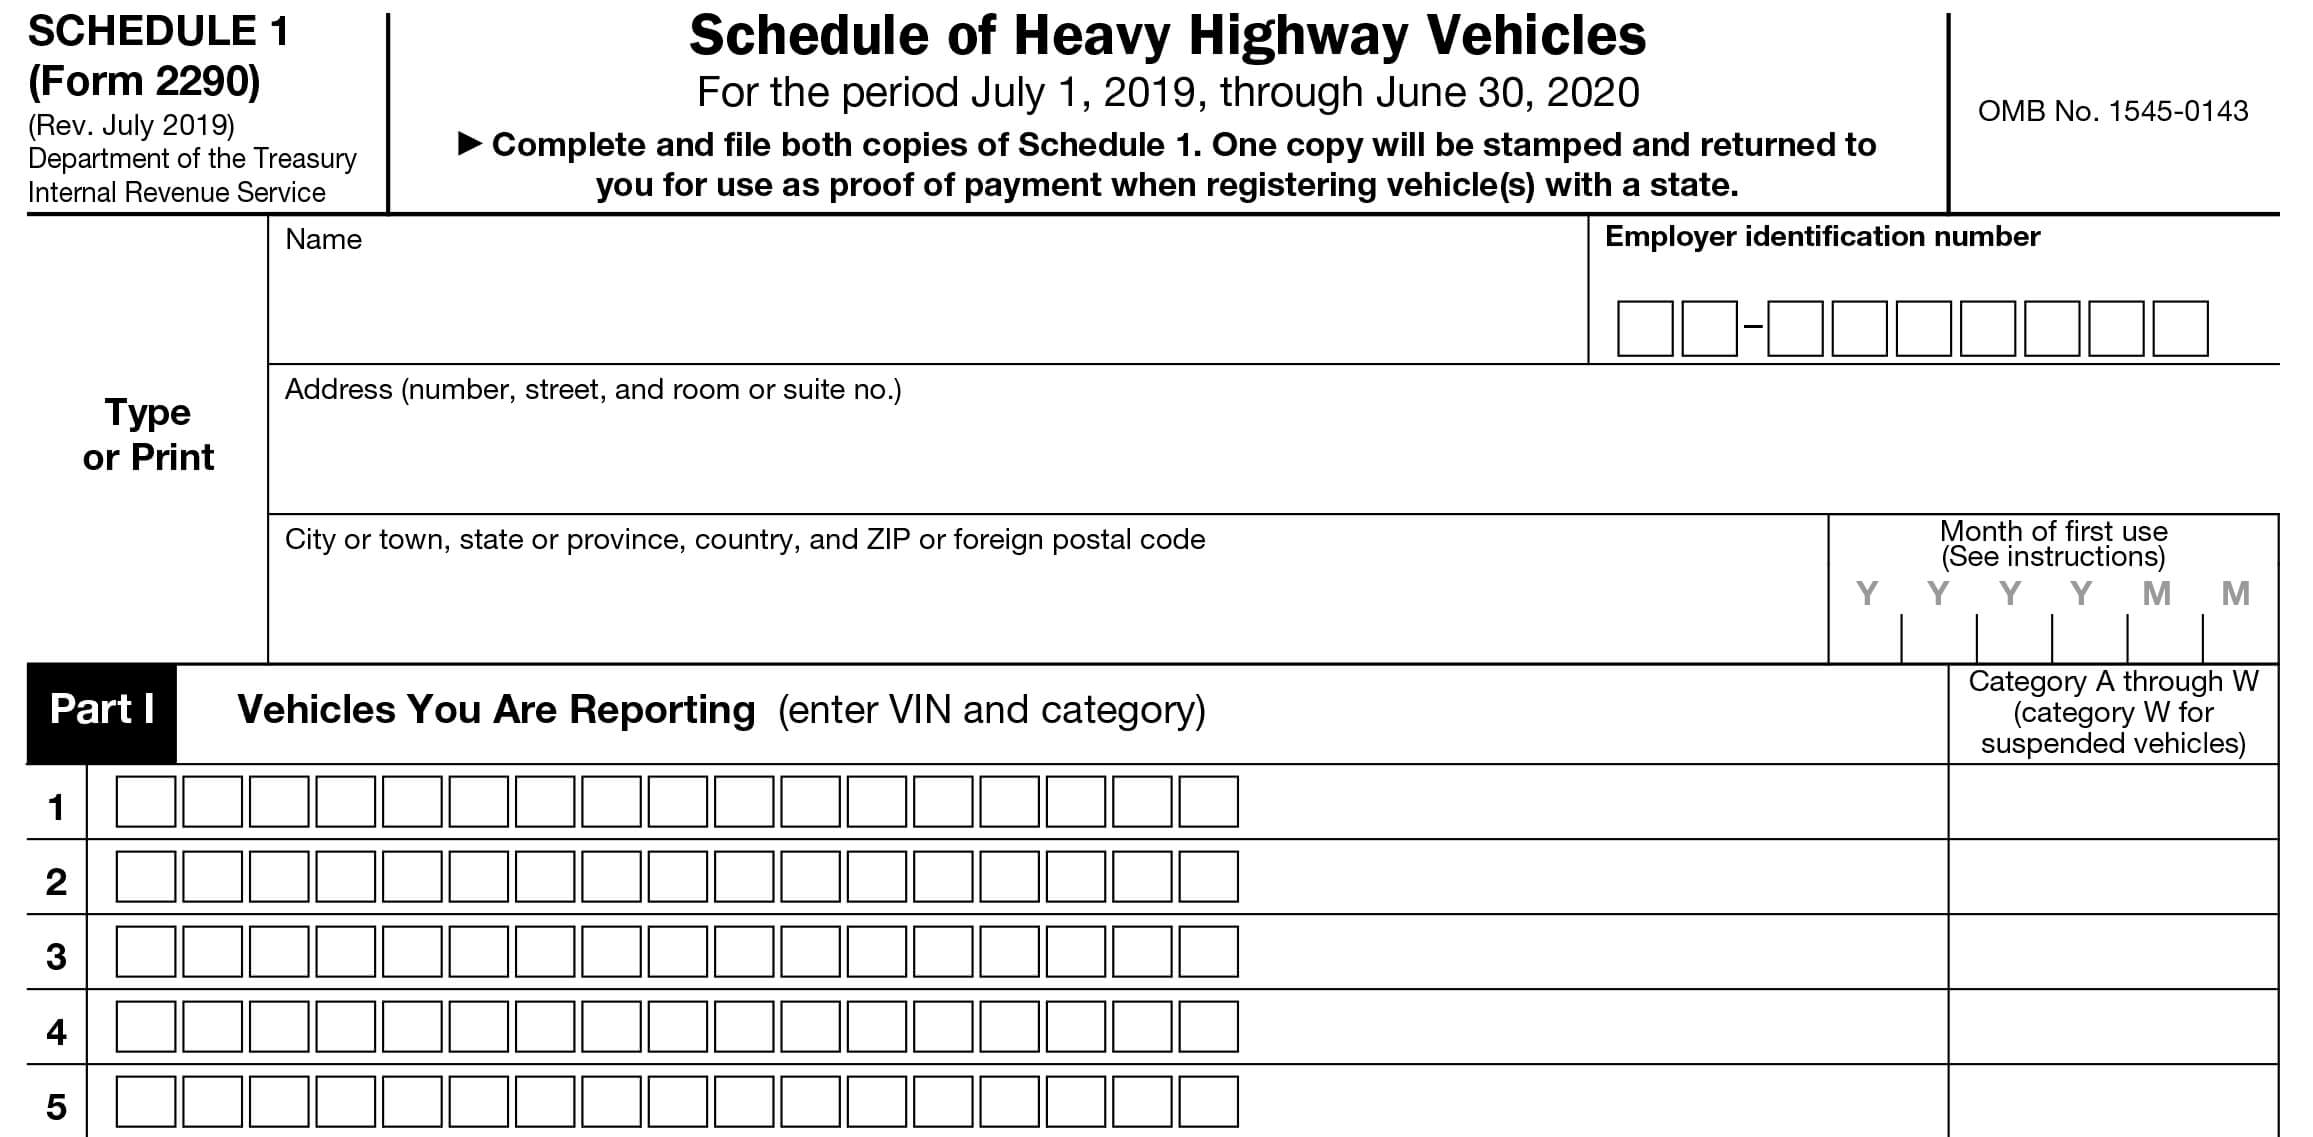 IRS 2290 Schedule 1, proof of HVUT payment